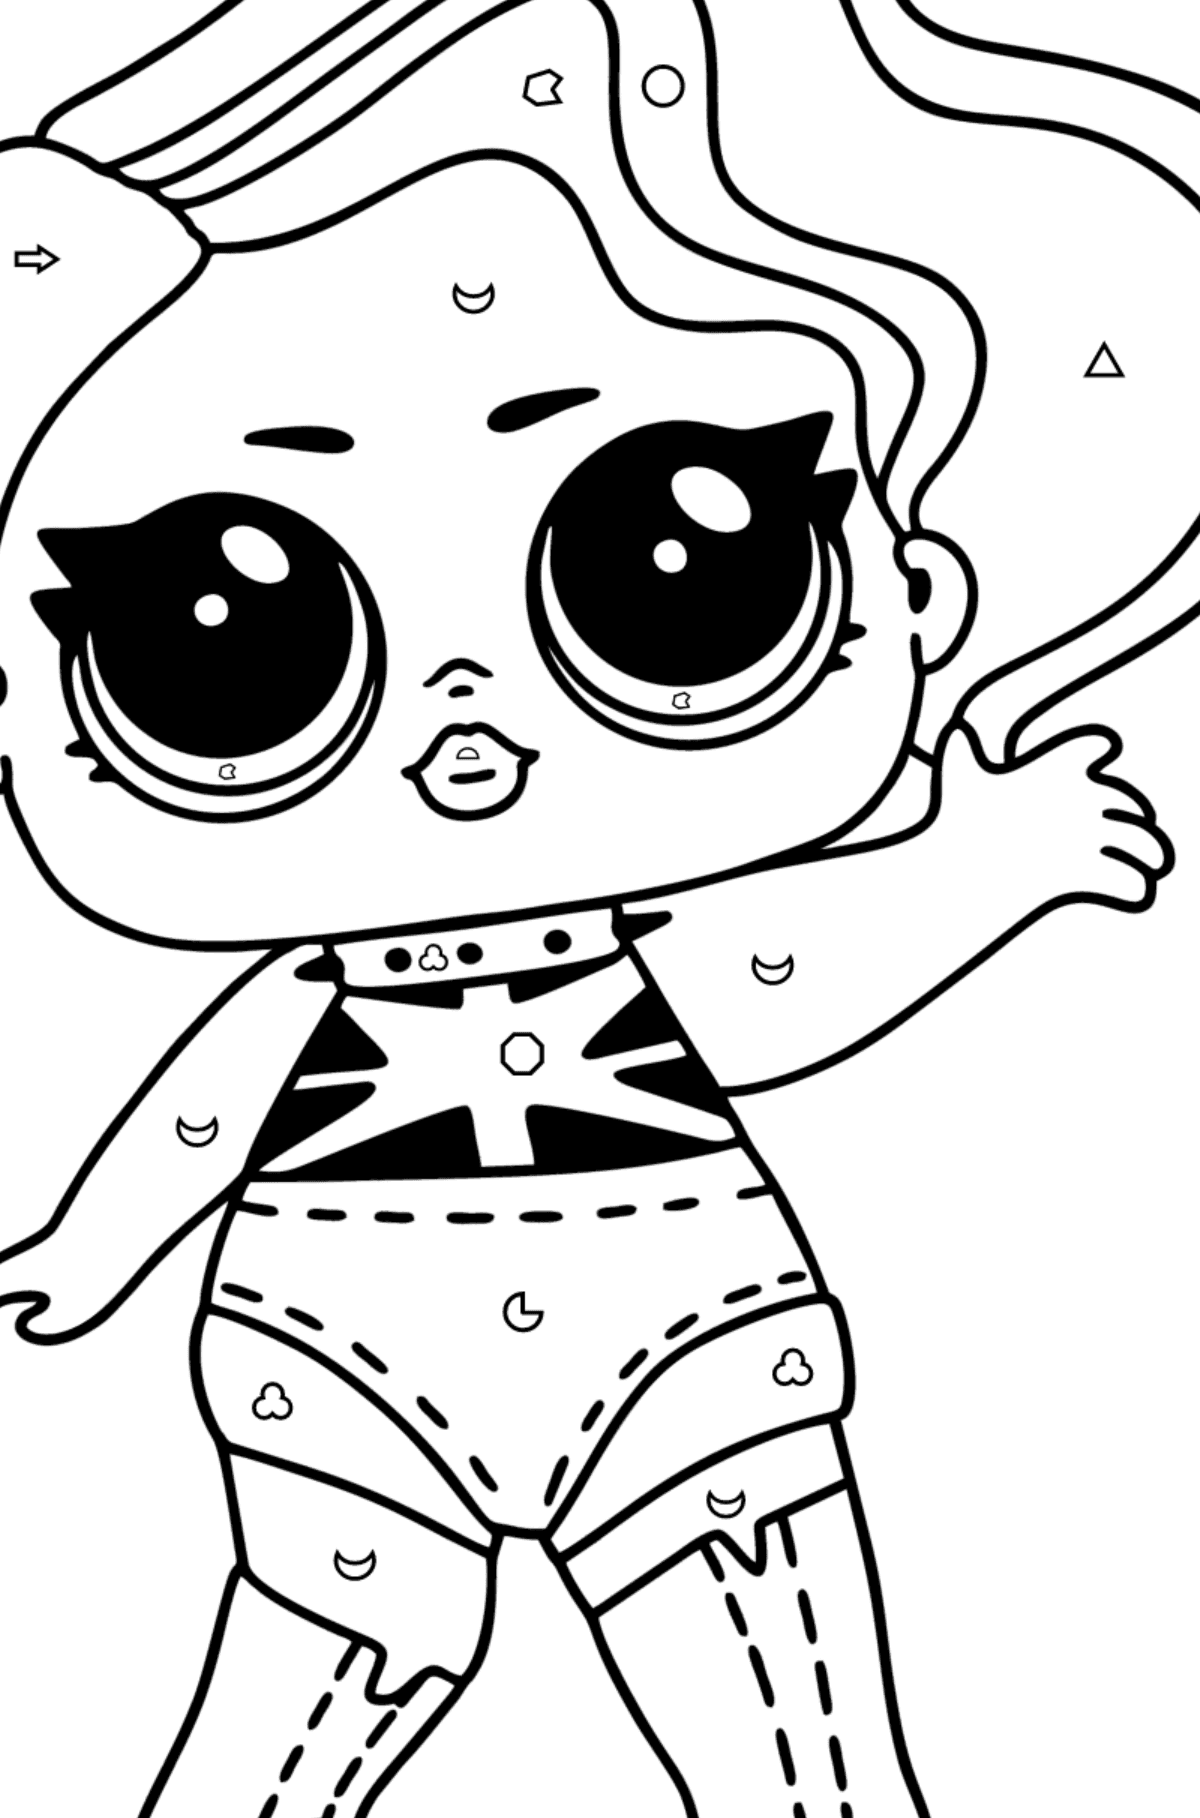 LOL Surprise Cheeky babe coloring page - Coloring by Geometric Shapes for Kids